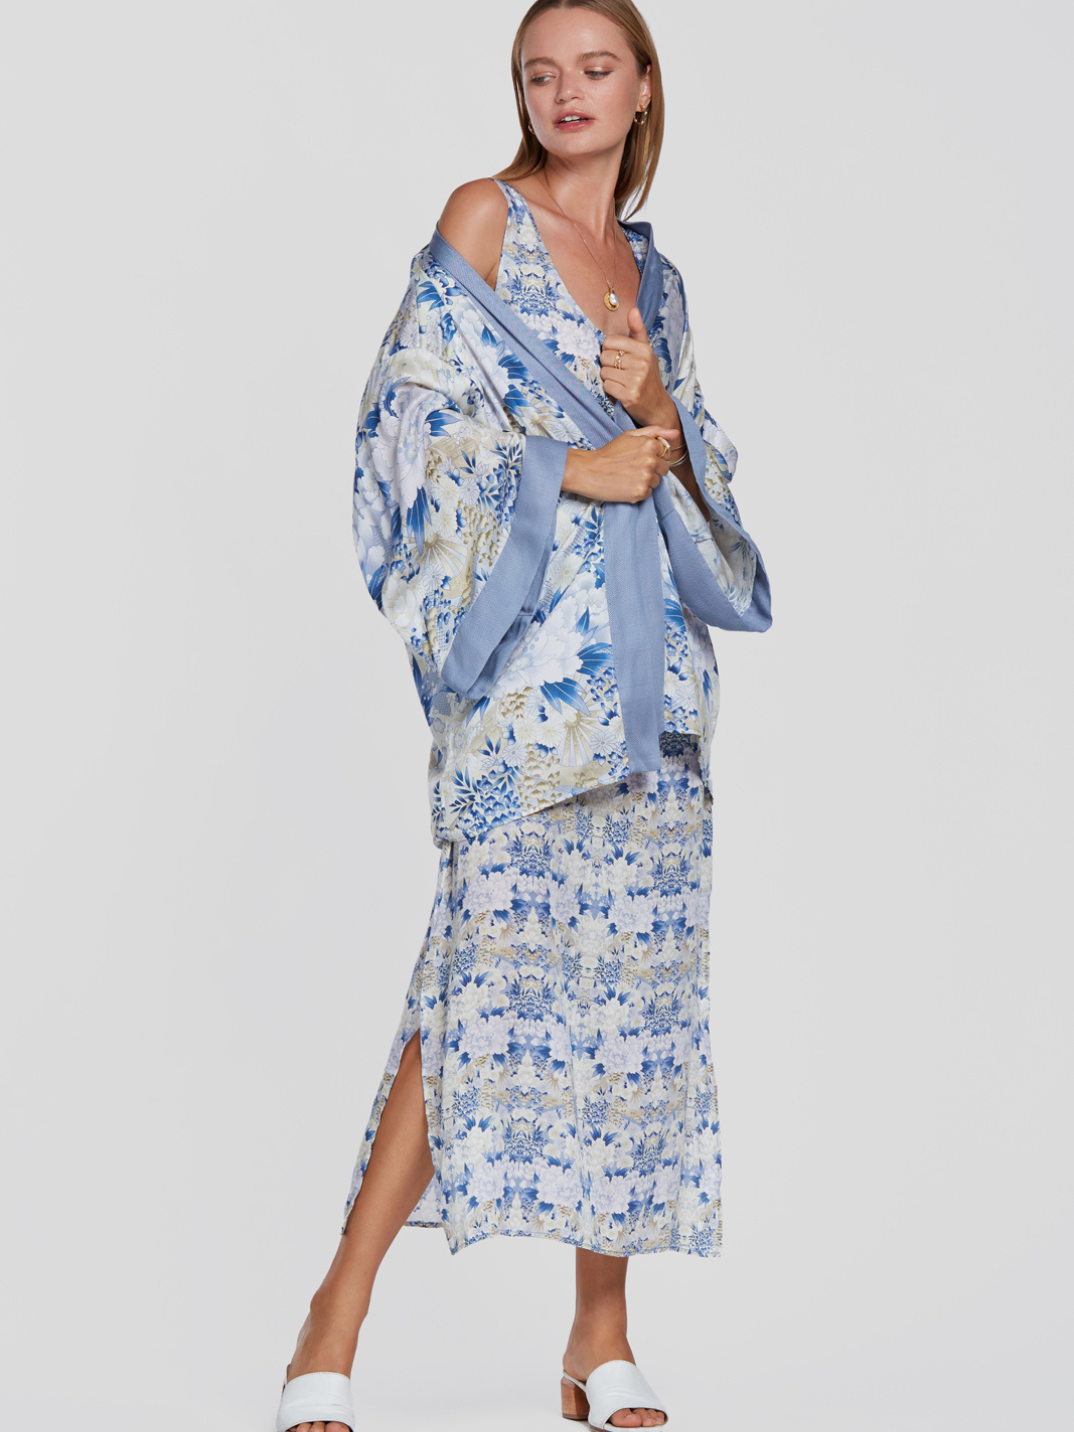 On sale now. The Kiku Flower Kimono is the ultimate eco-luxe piece for your capsule wardrobe. Ethically made in Bali with biodegradable materials. Shop sustainable fashion.